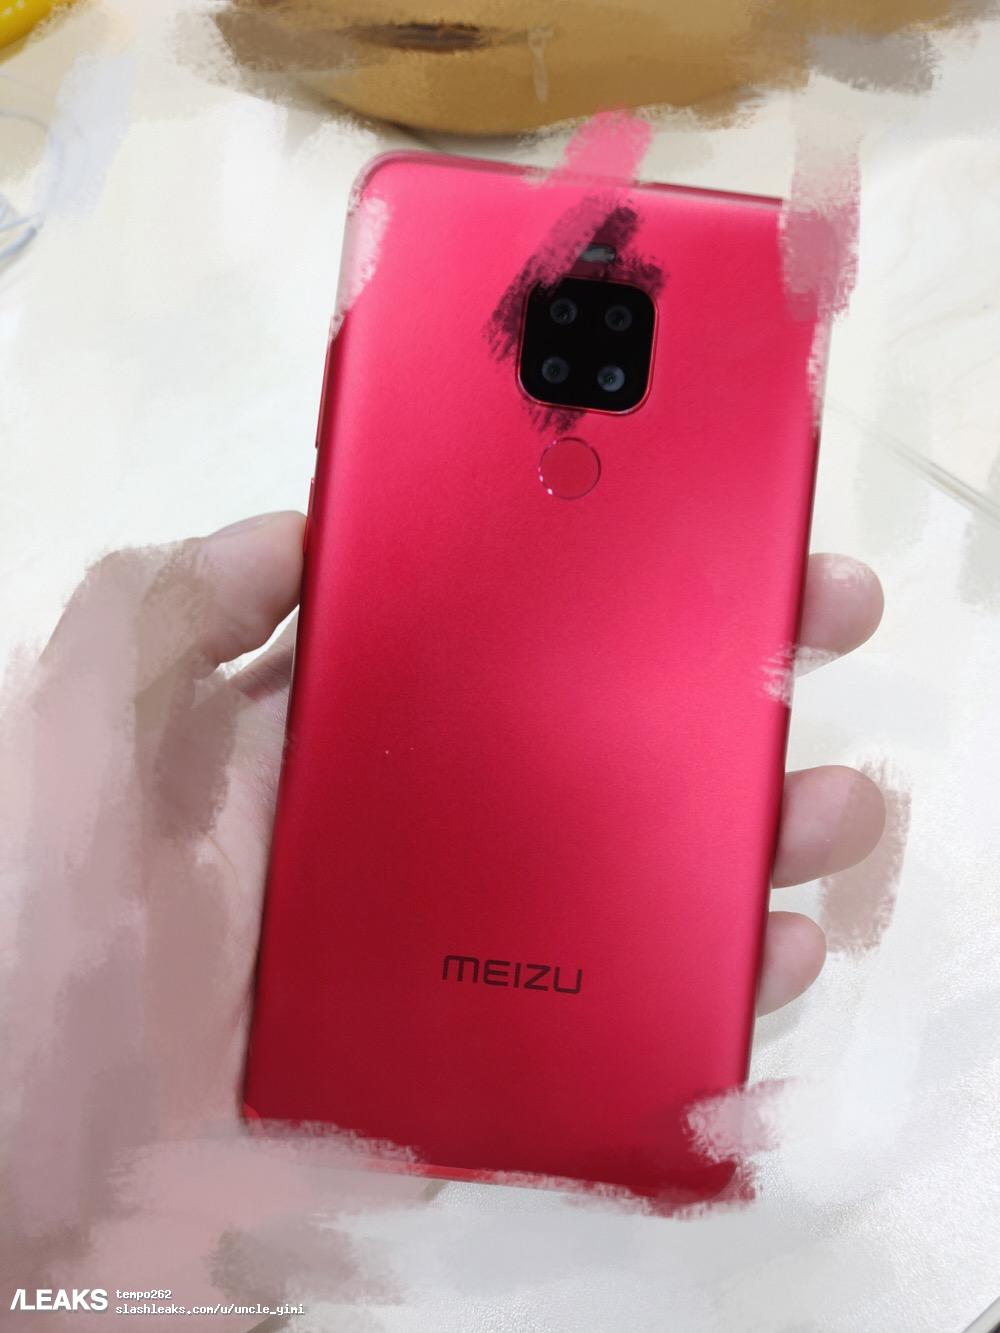 Meizu Note 8 Plus Flowed Out Photo Displays 4 Rear Cameras